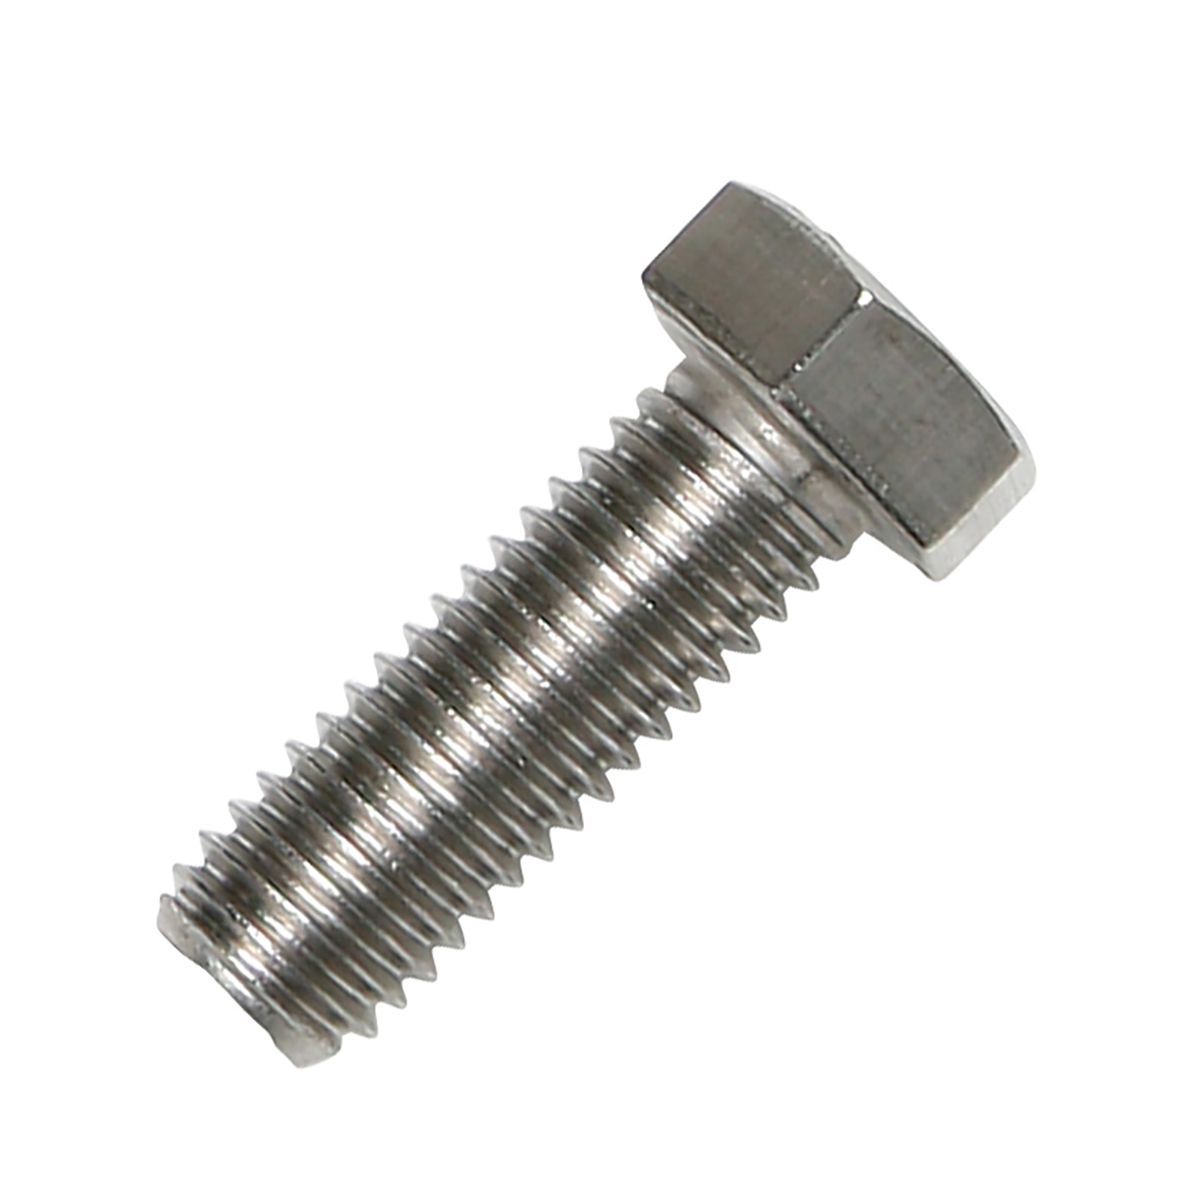 1/2 x 1 1/2 Stainless UNC Hex Bolt 1/2 x 1 1/2 Stainless Set Screws 3/4 AF x5 